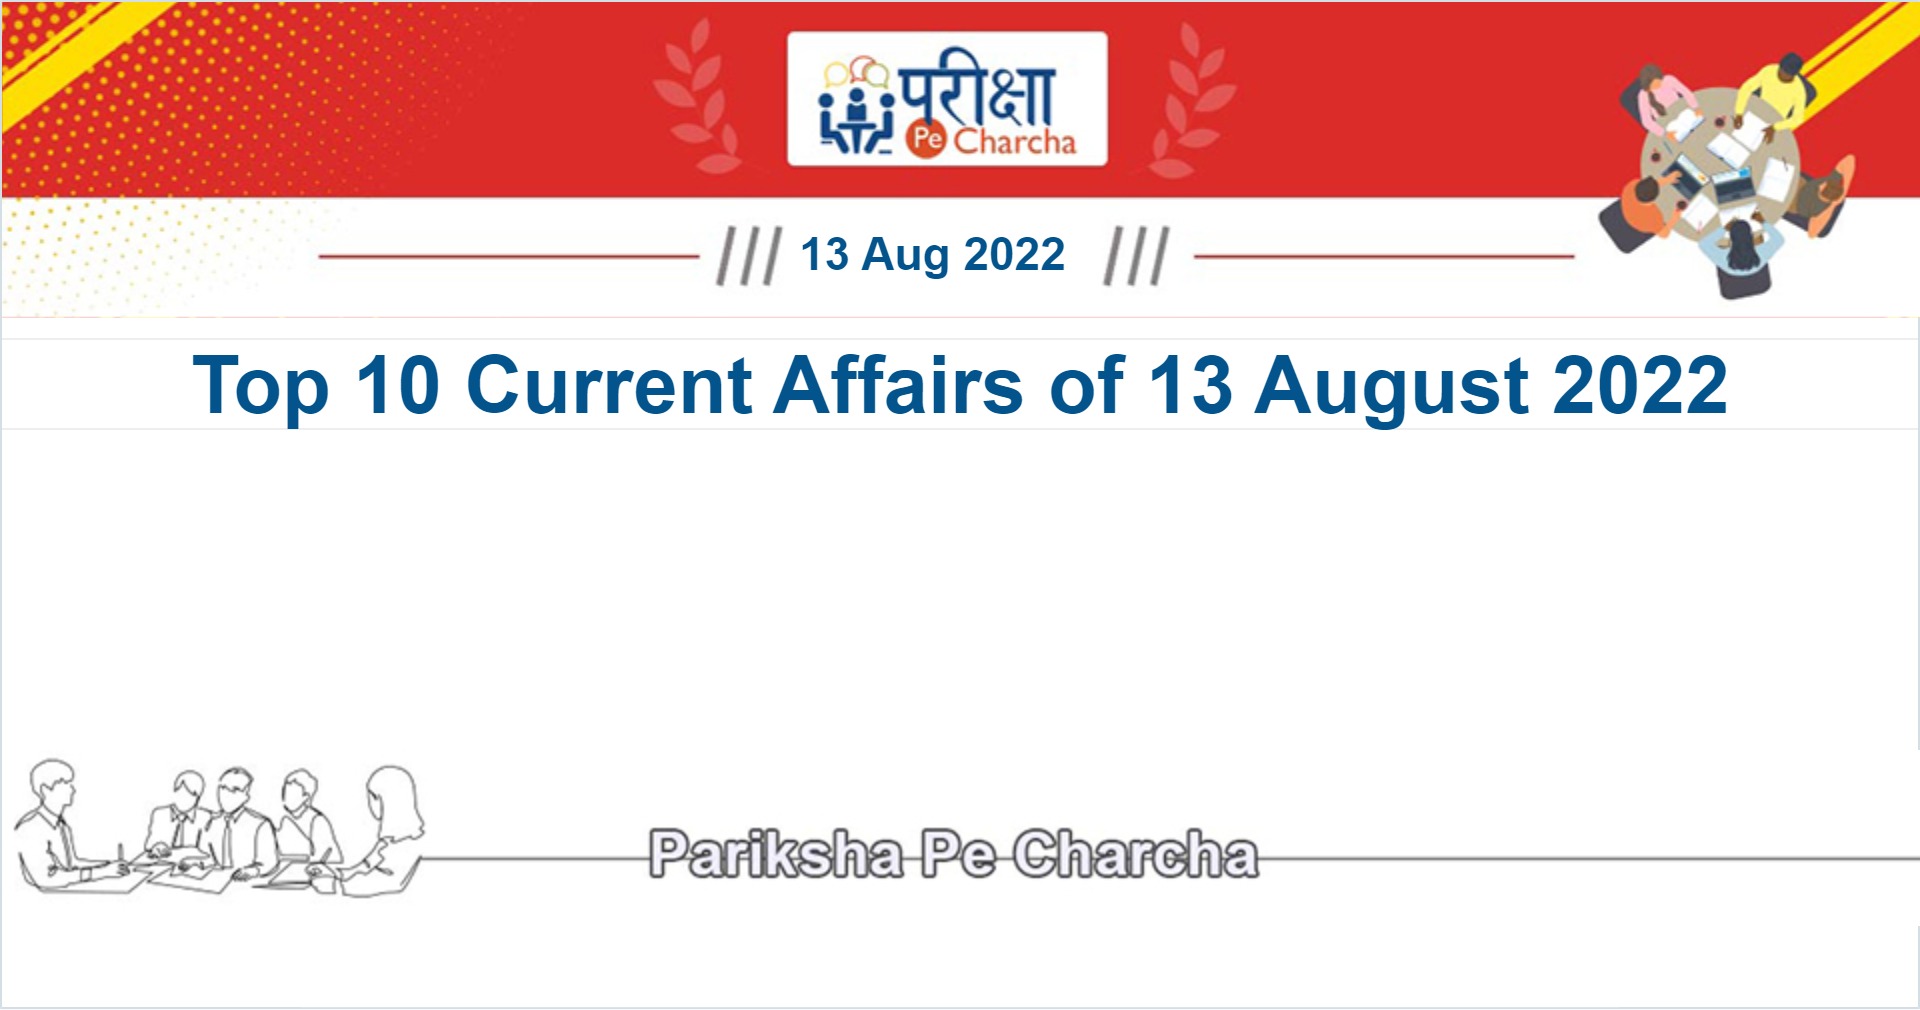 Current Affairs of 13 August 2022 in English and Hindi